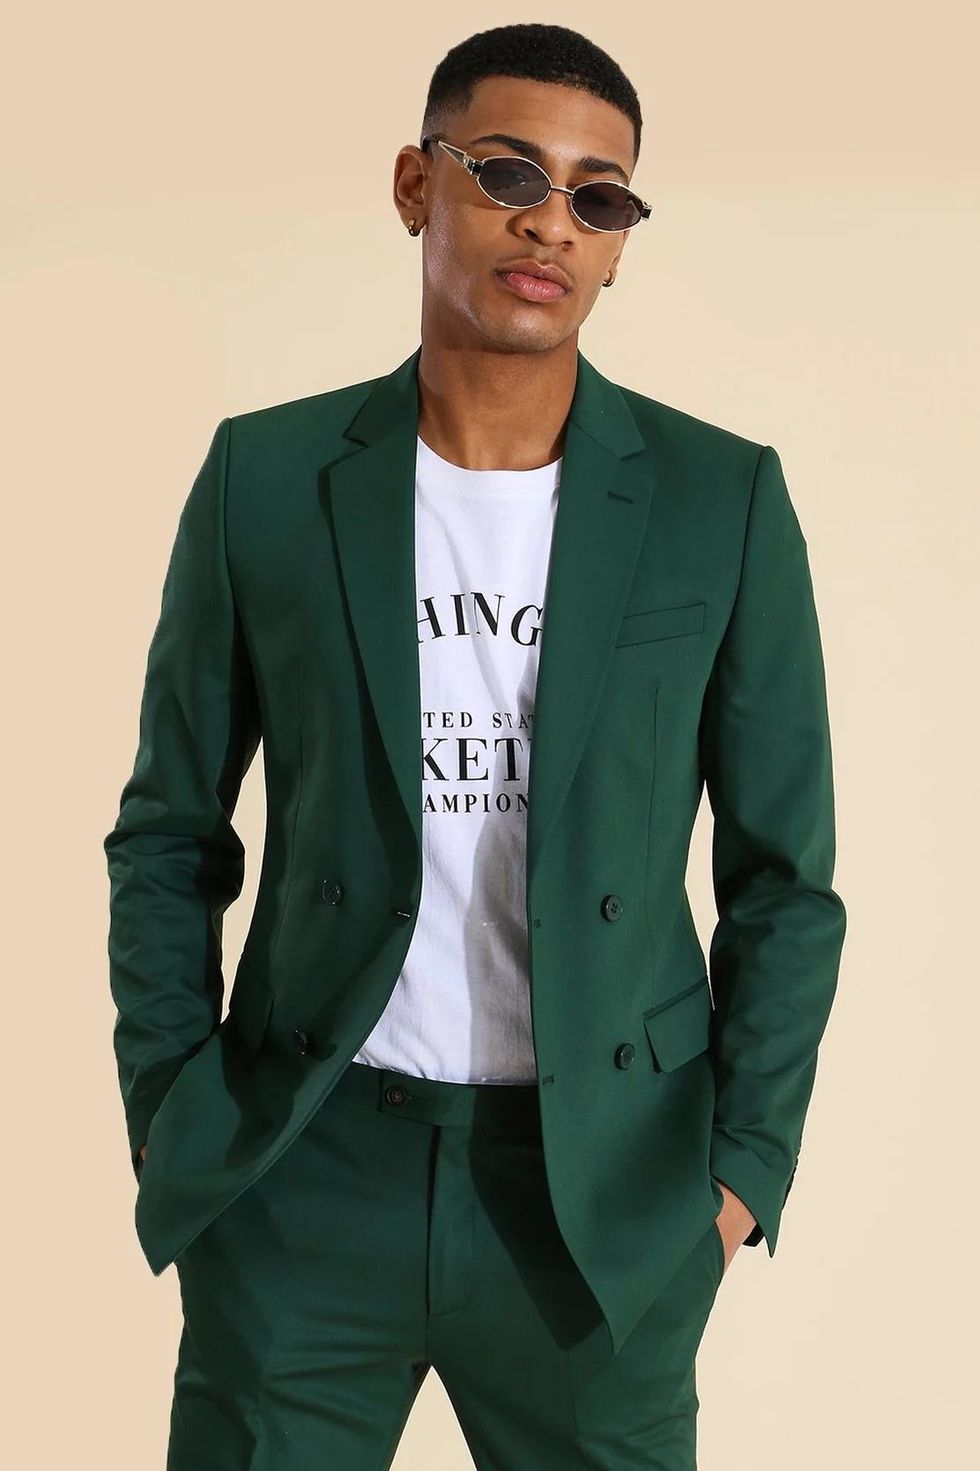 11 Different Blazer & T-Shirt Outfits for Men - Suits Expert